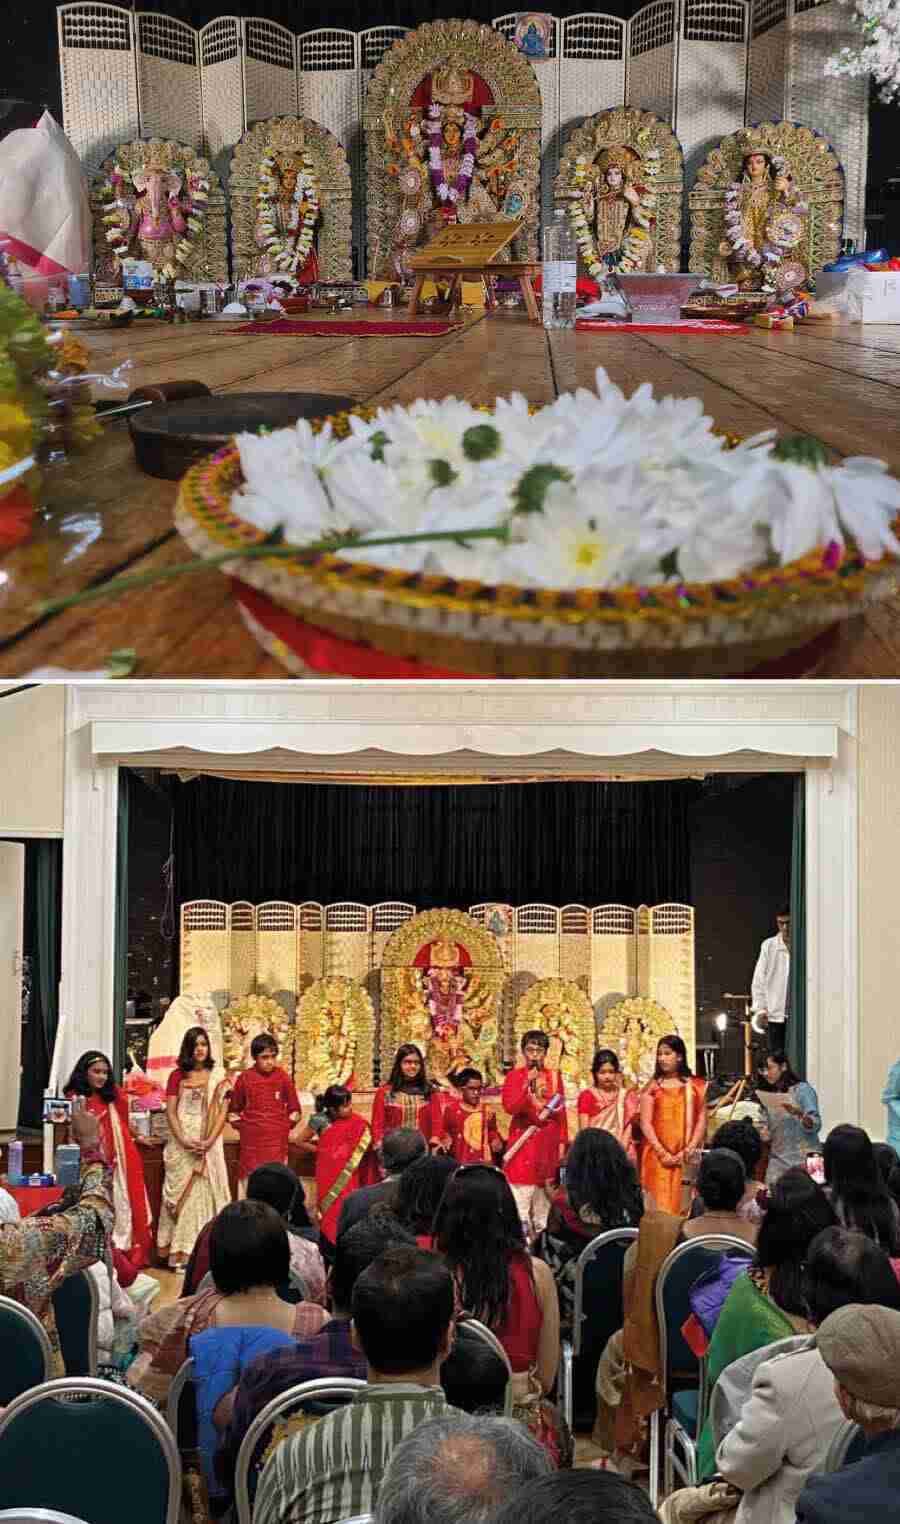 Proyas is a ‘Sarbojanin’ Durga Puja held in Chipperfield Village Hall, Kings Langley. This year the Durga Puja was marked by a series of shows and events like a fashion walk, Bollywood medley, as well as street food pop-ups and a handicraft bazaar 